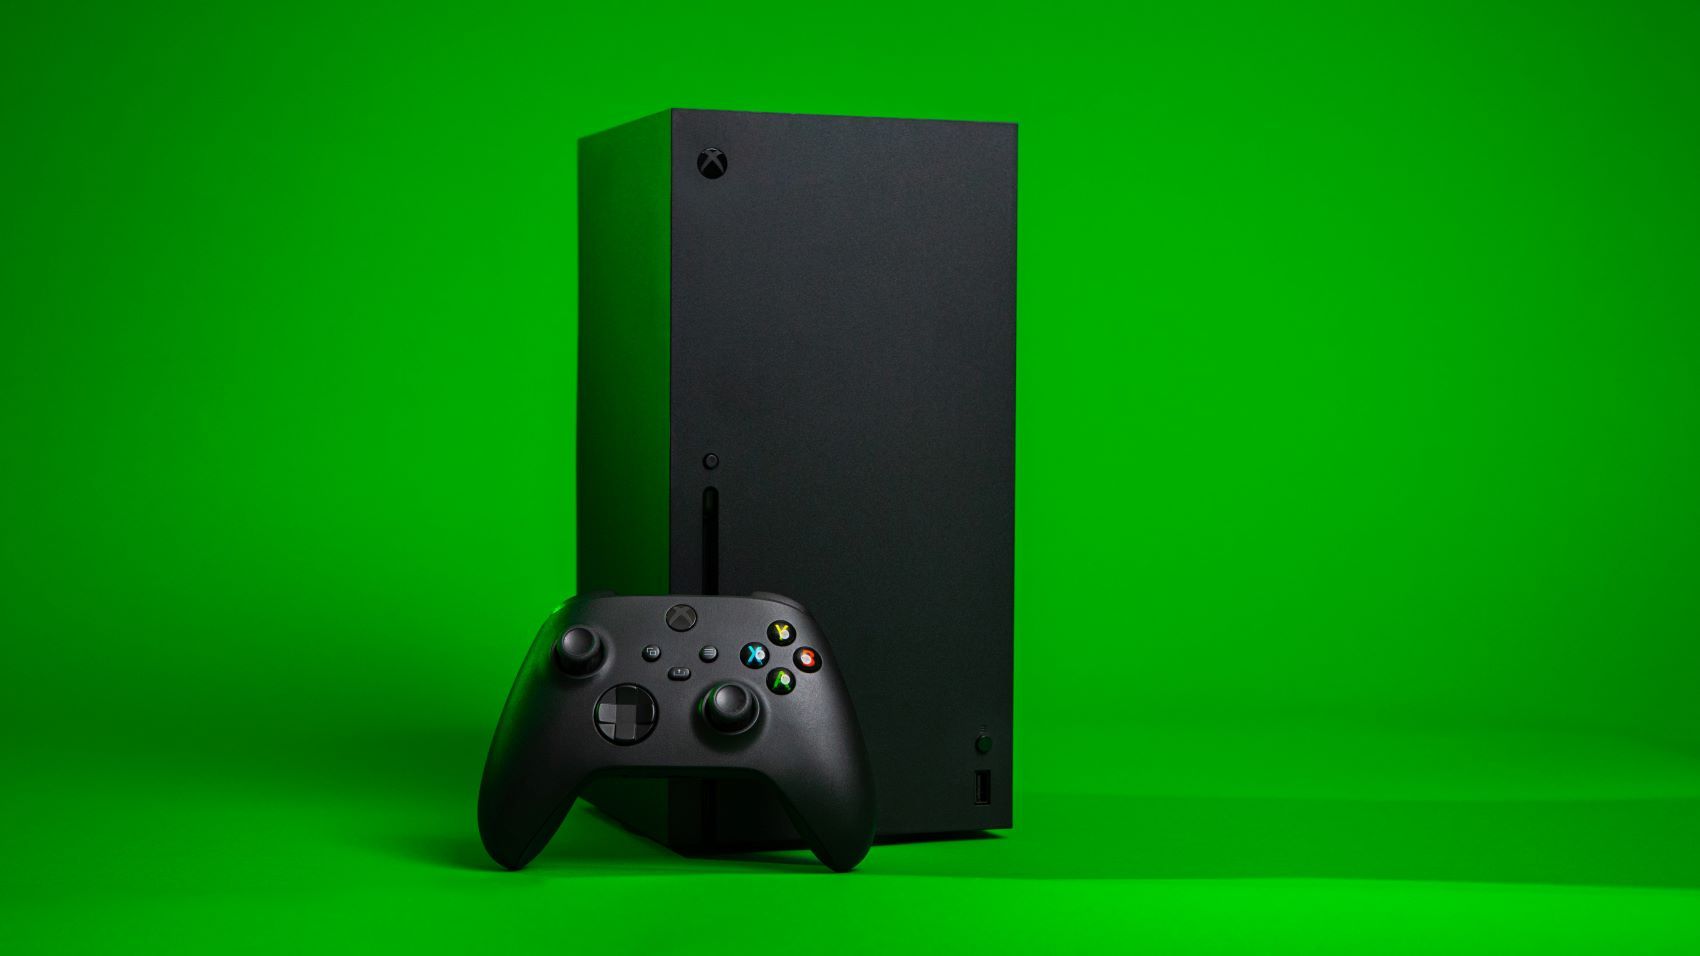 A photograph of an Xbox Series X console and controller against a green background